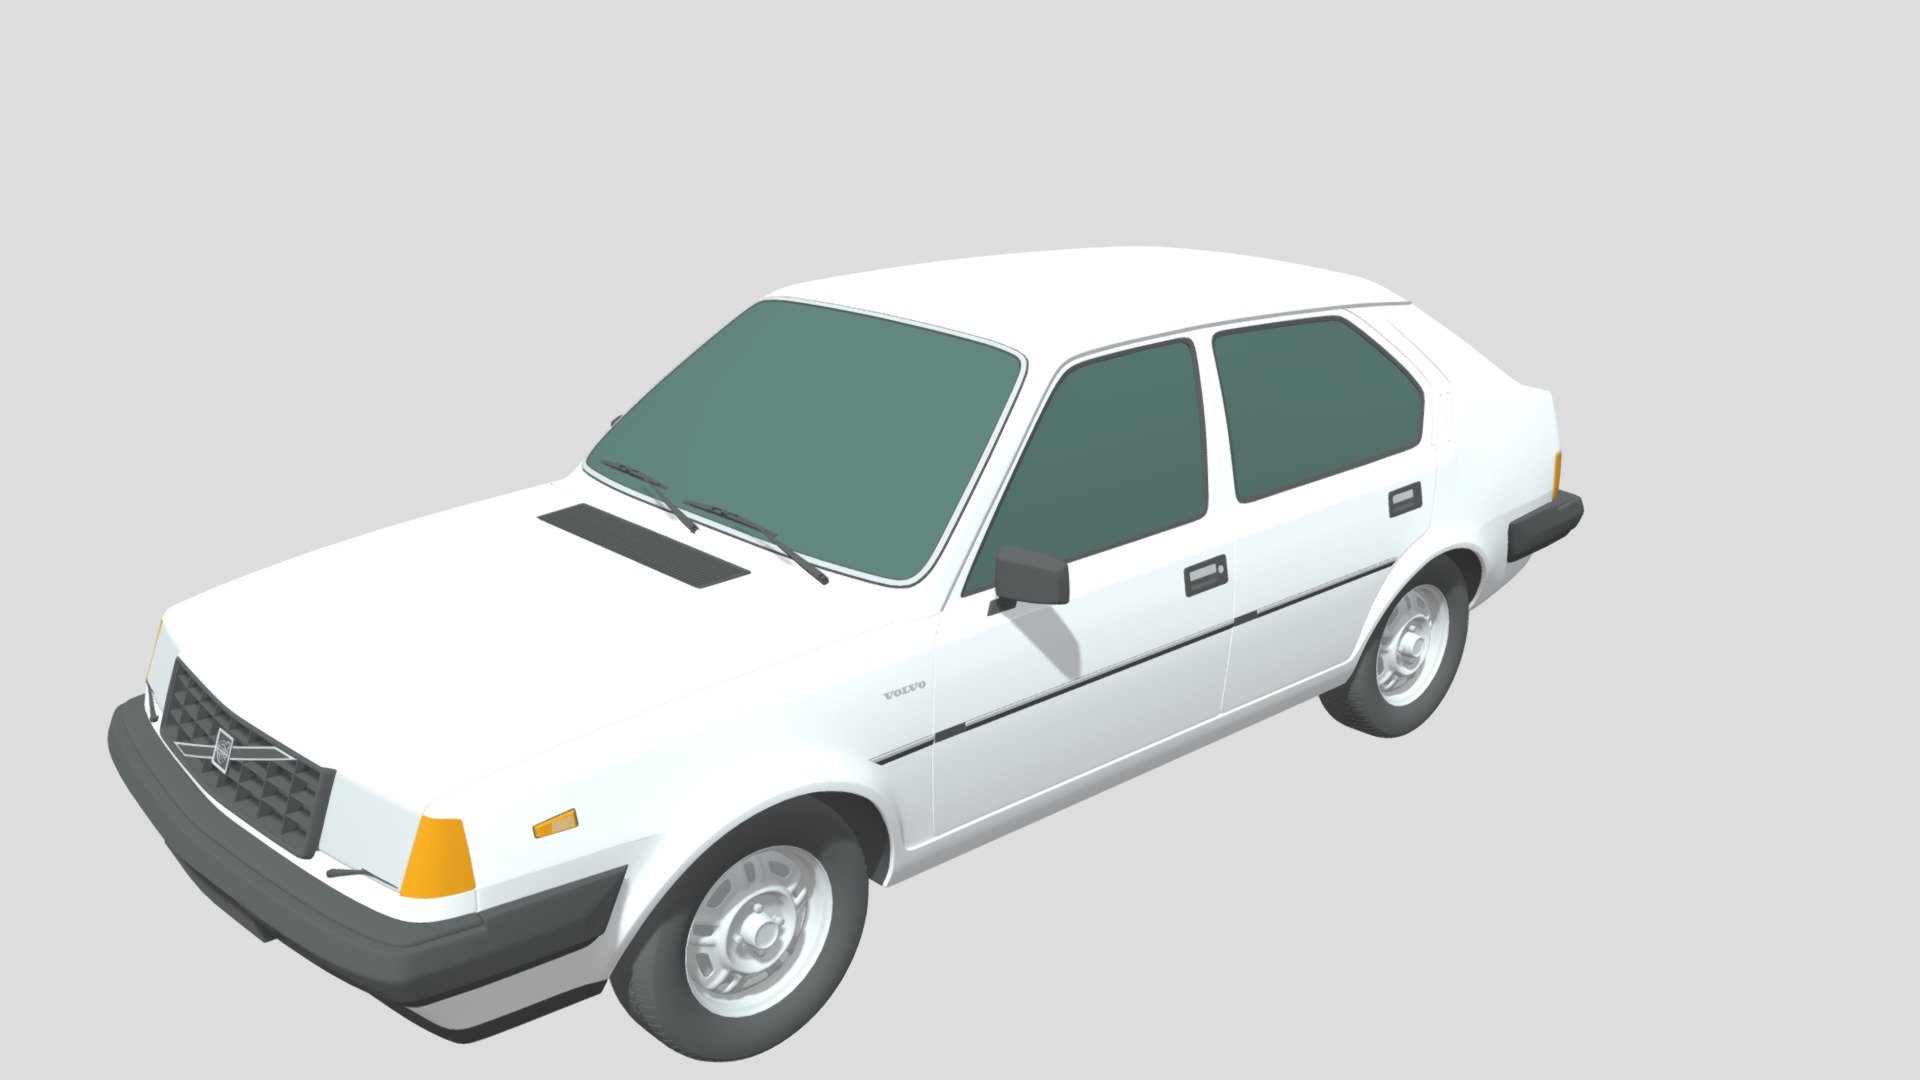 Introducing our stunning photorealistic 3D model of the Volvo 345 (5-Doors) (1980) car, a true masterpiece of digital craftsmanship that will elevate your projects to the next level. This meticulously crafted model captures every curve, detail, and essence of a real Volvo 345 (5-Doors) (1980) car, providing you with unparalleled realism and versatility for your creative endeavors.

Our photorealistic 3D model of the Volvo 345 (5-Doors) (1980) car is a testament to precision and attention to detail. Each contour, from the sleek body lines to the intricacies of the headlights and tail lights, has been painstakingly recreated to mirror the elegance and realism of a genuine Volvo 345 (5-Doors) (1980) automobile. Whether you're an automotive designer, a video game developer, or a filmmaker, this 3D model will bring your visions to life with exceptional fidelity 3d model